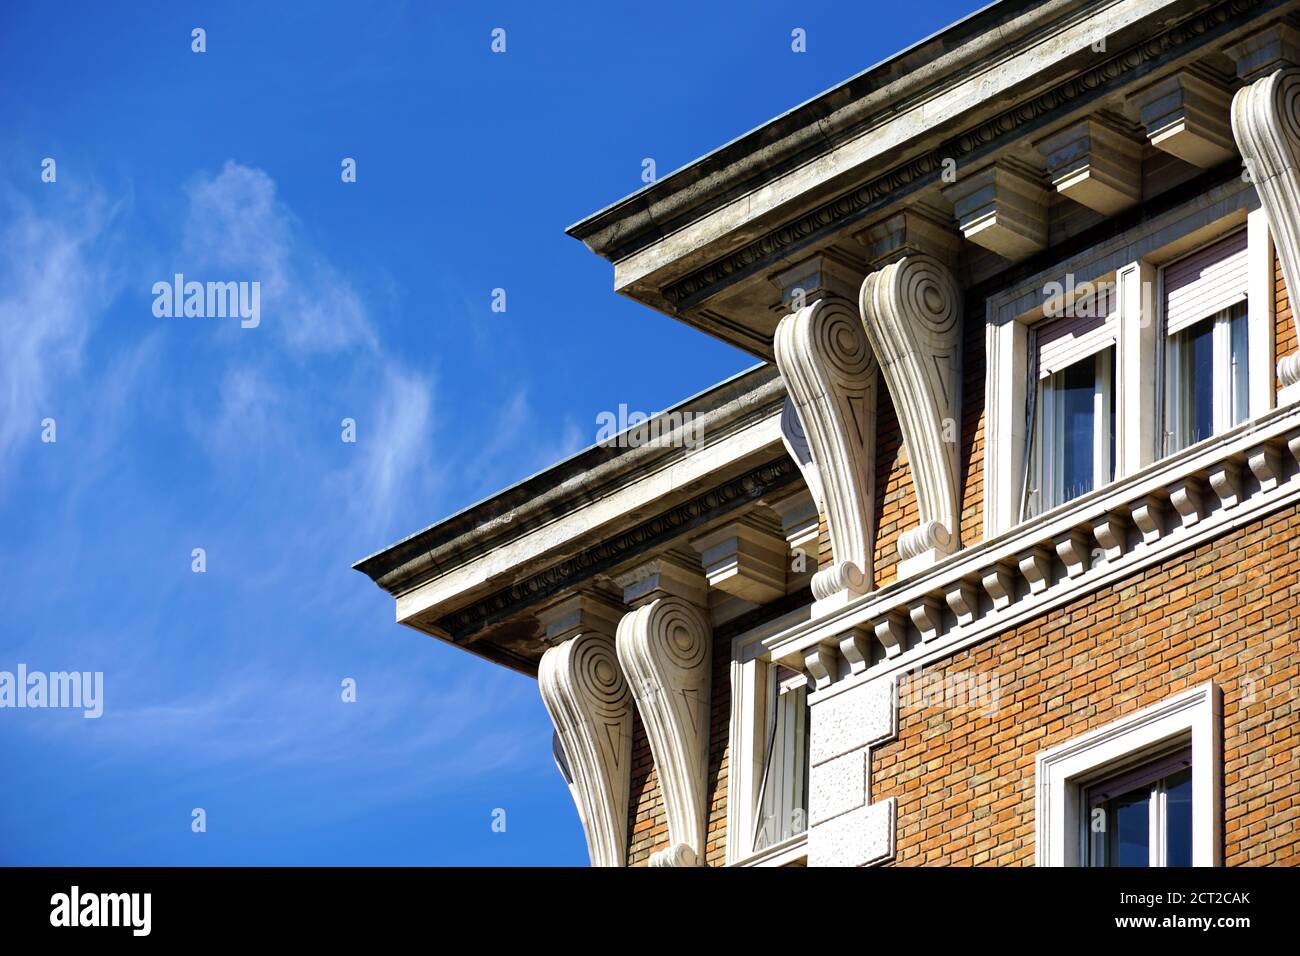 Detail of the architecture on building from nineteenth-century buildings Stock Photo